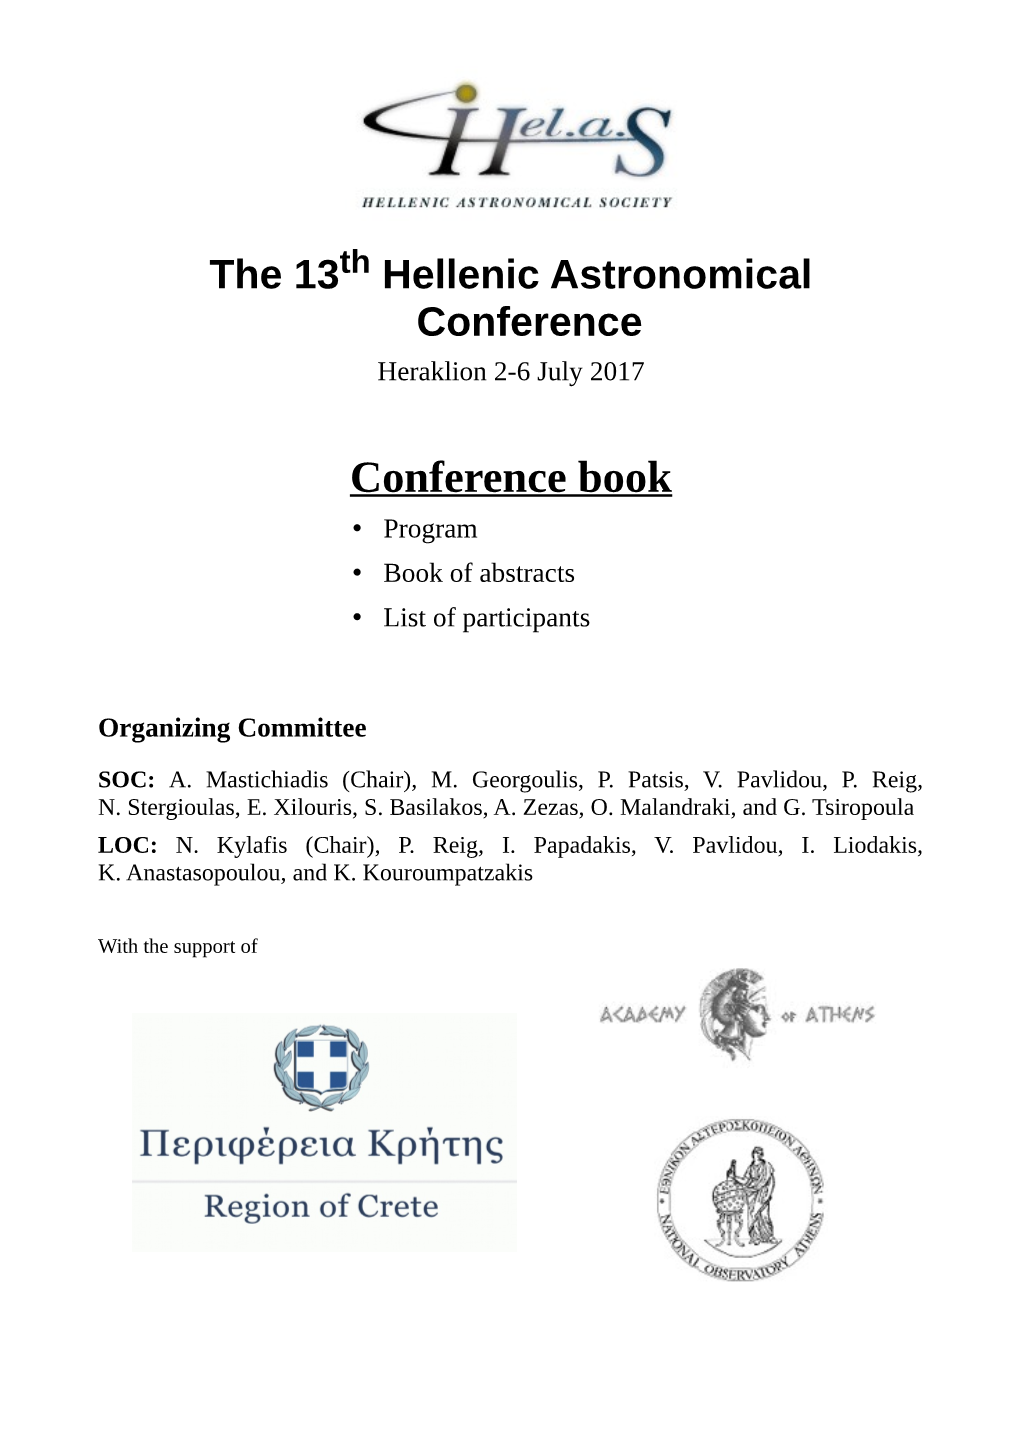 Conference Book • Program • Book of Abstracts • List of Participants